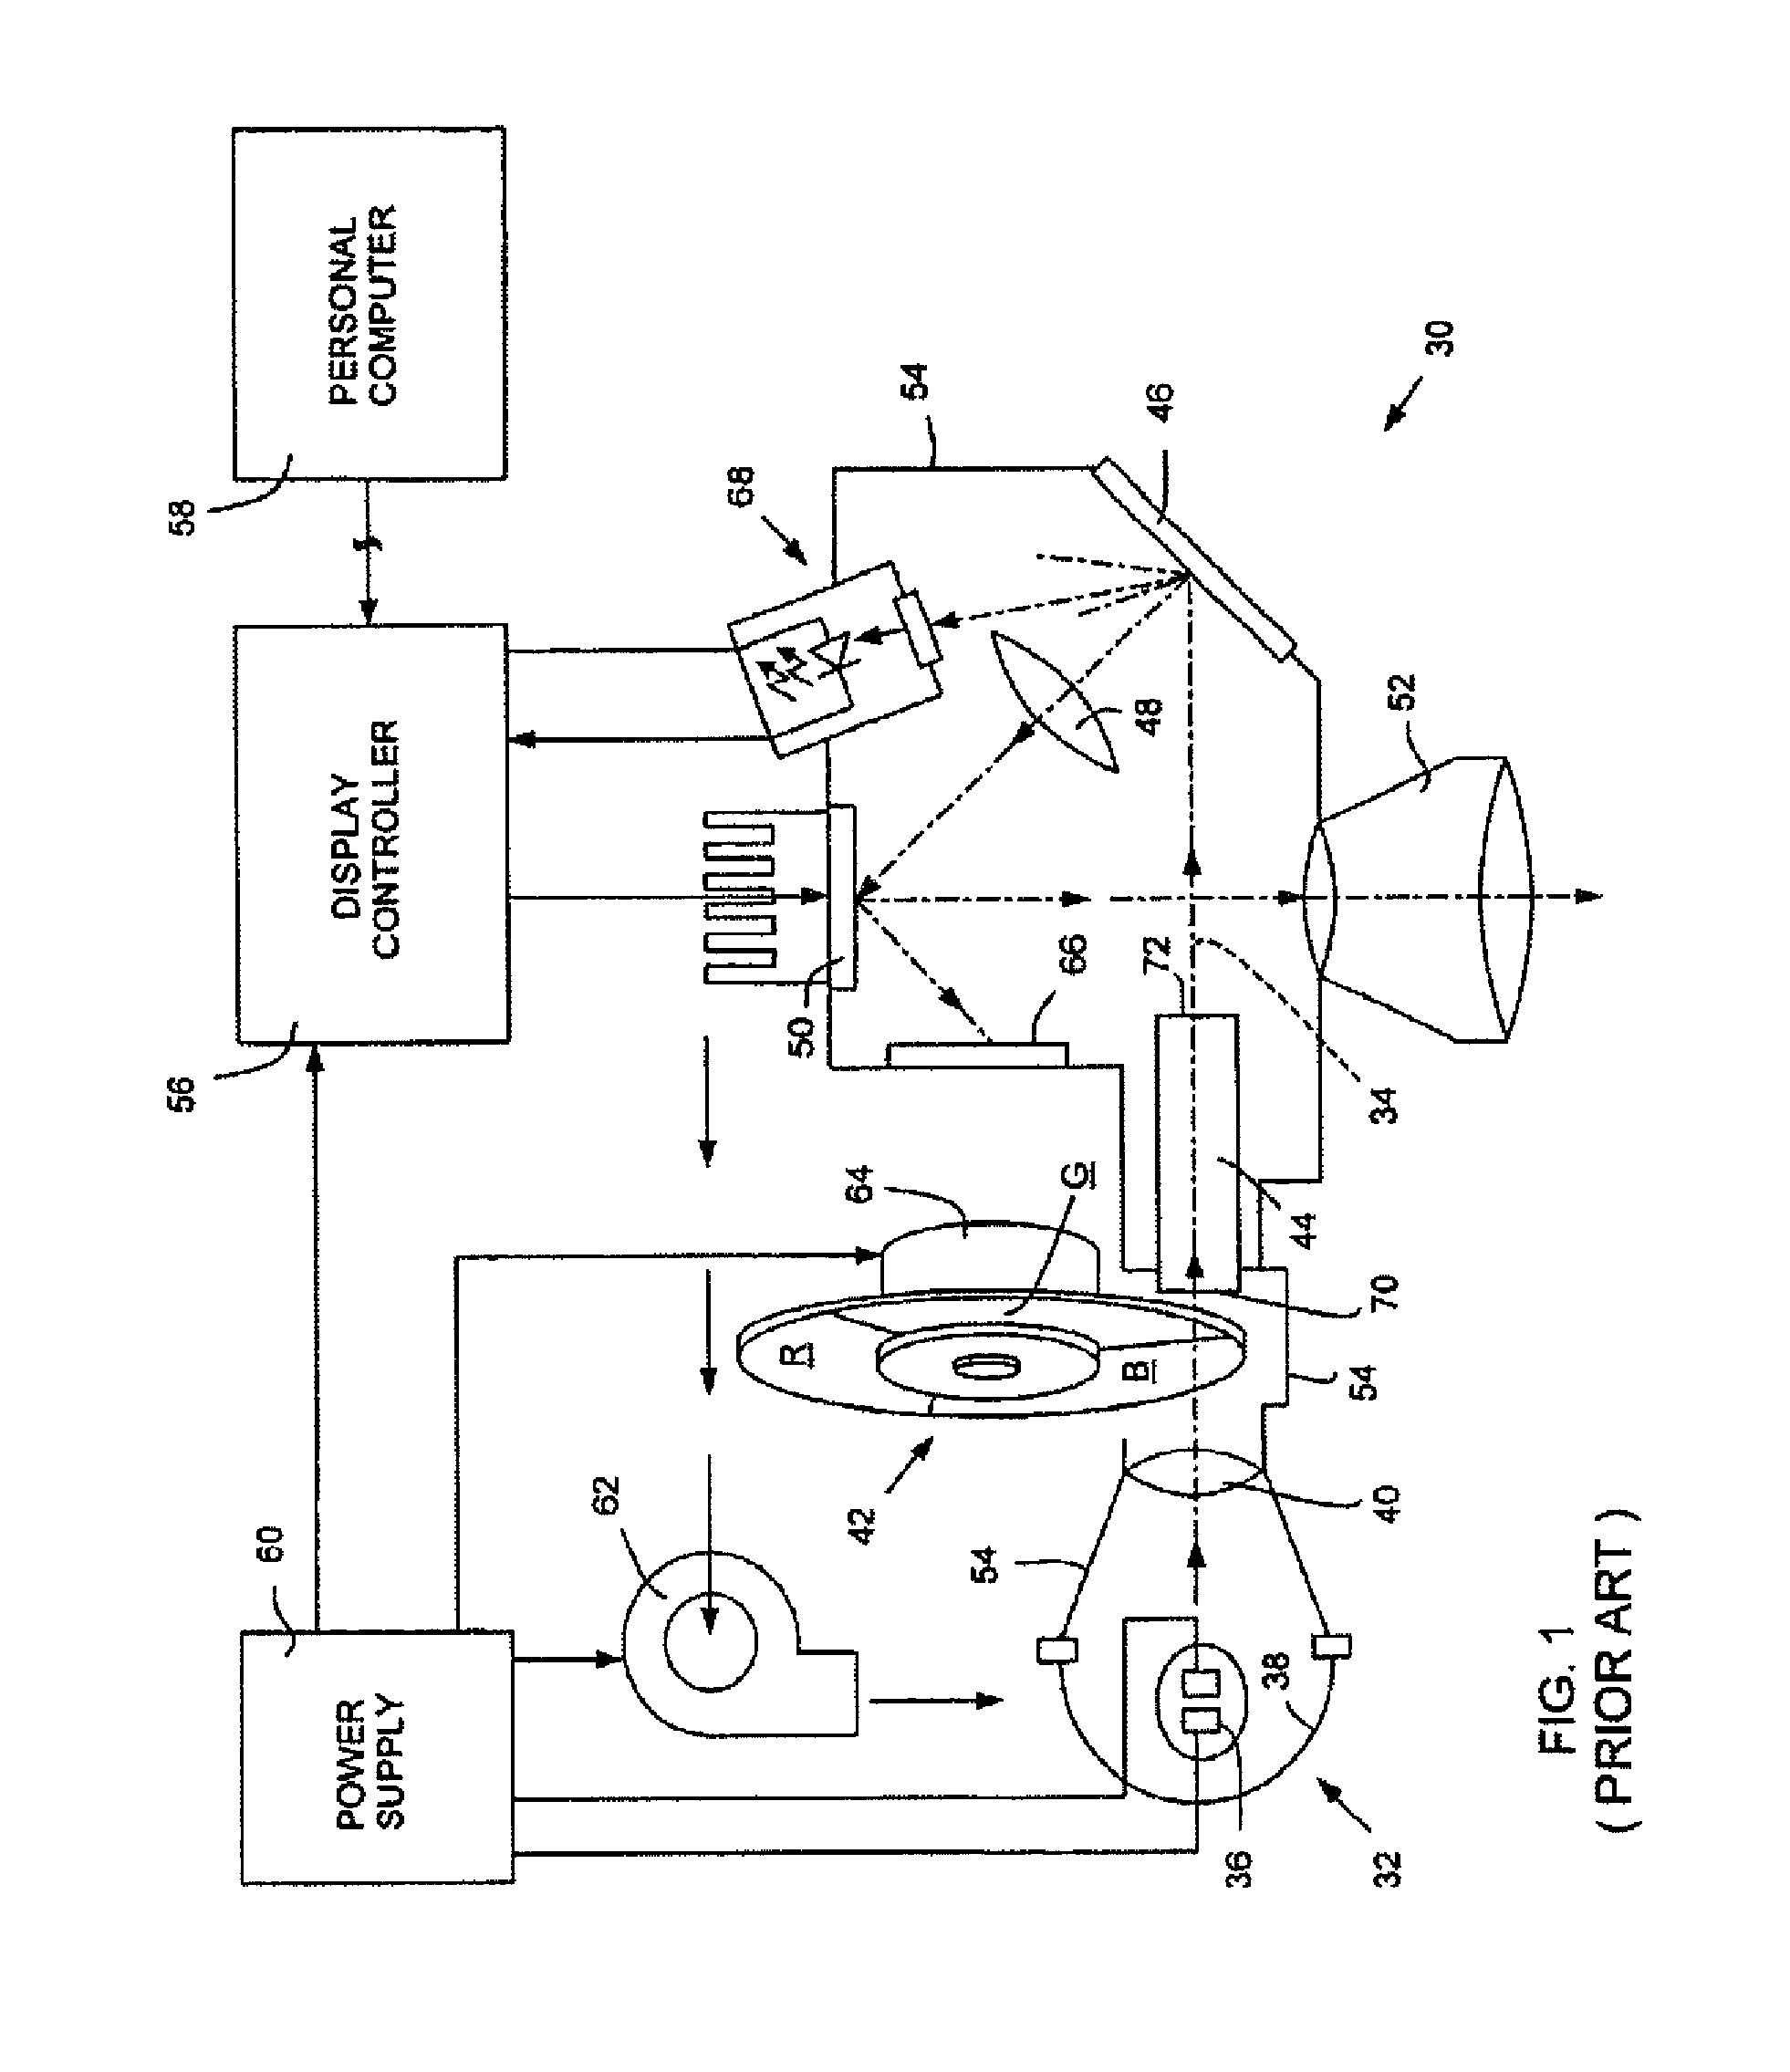 Anamorphic illumination of micro-electromechanical display devices employed in multimedia projectors